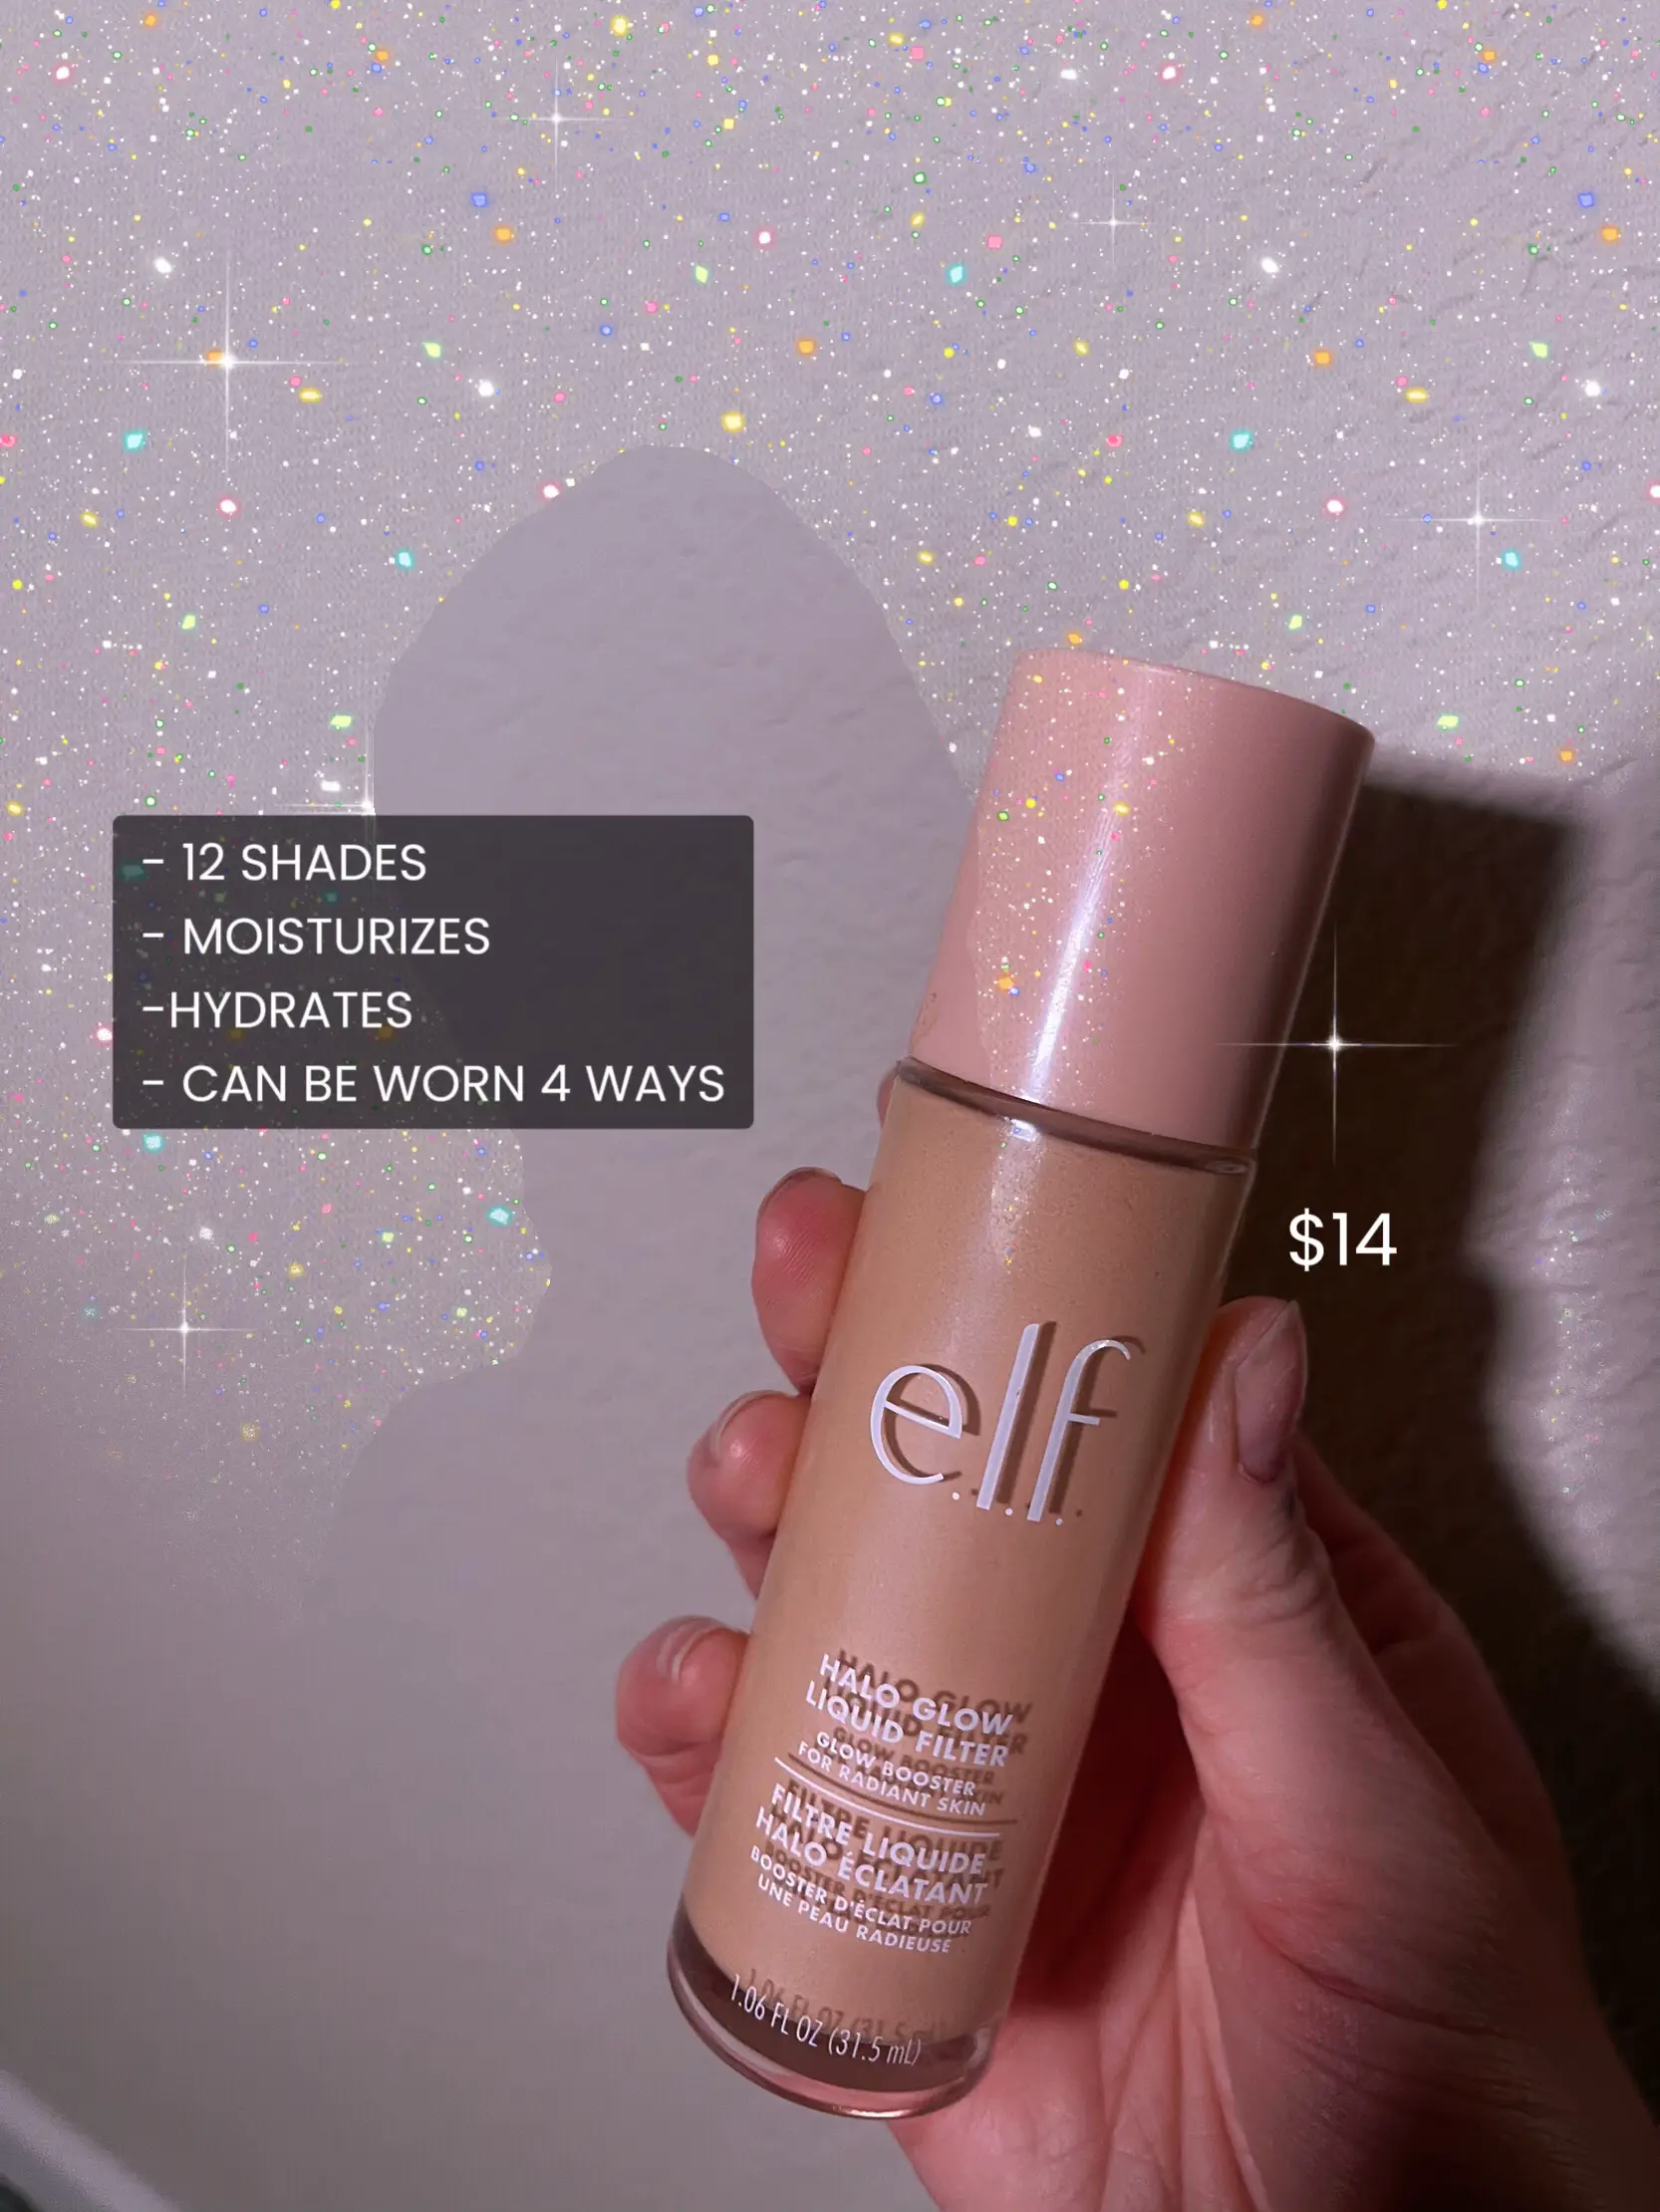 My Honest Review of the elf Halo Glow Wands - The Lipstick Narratives